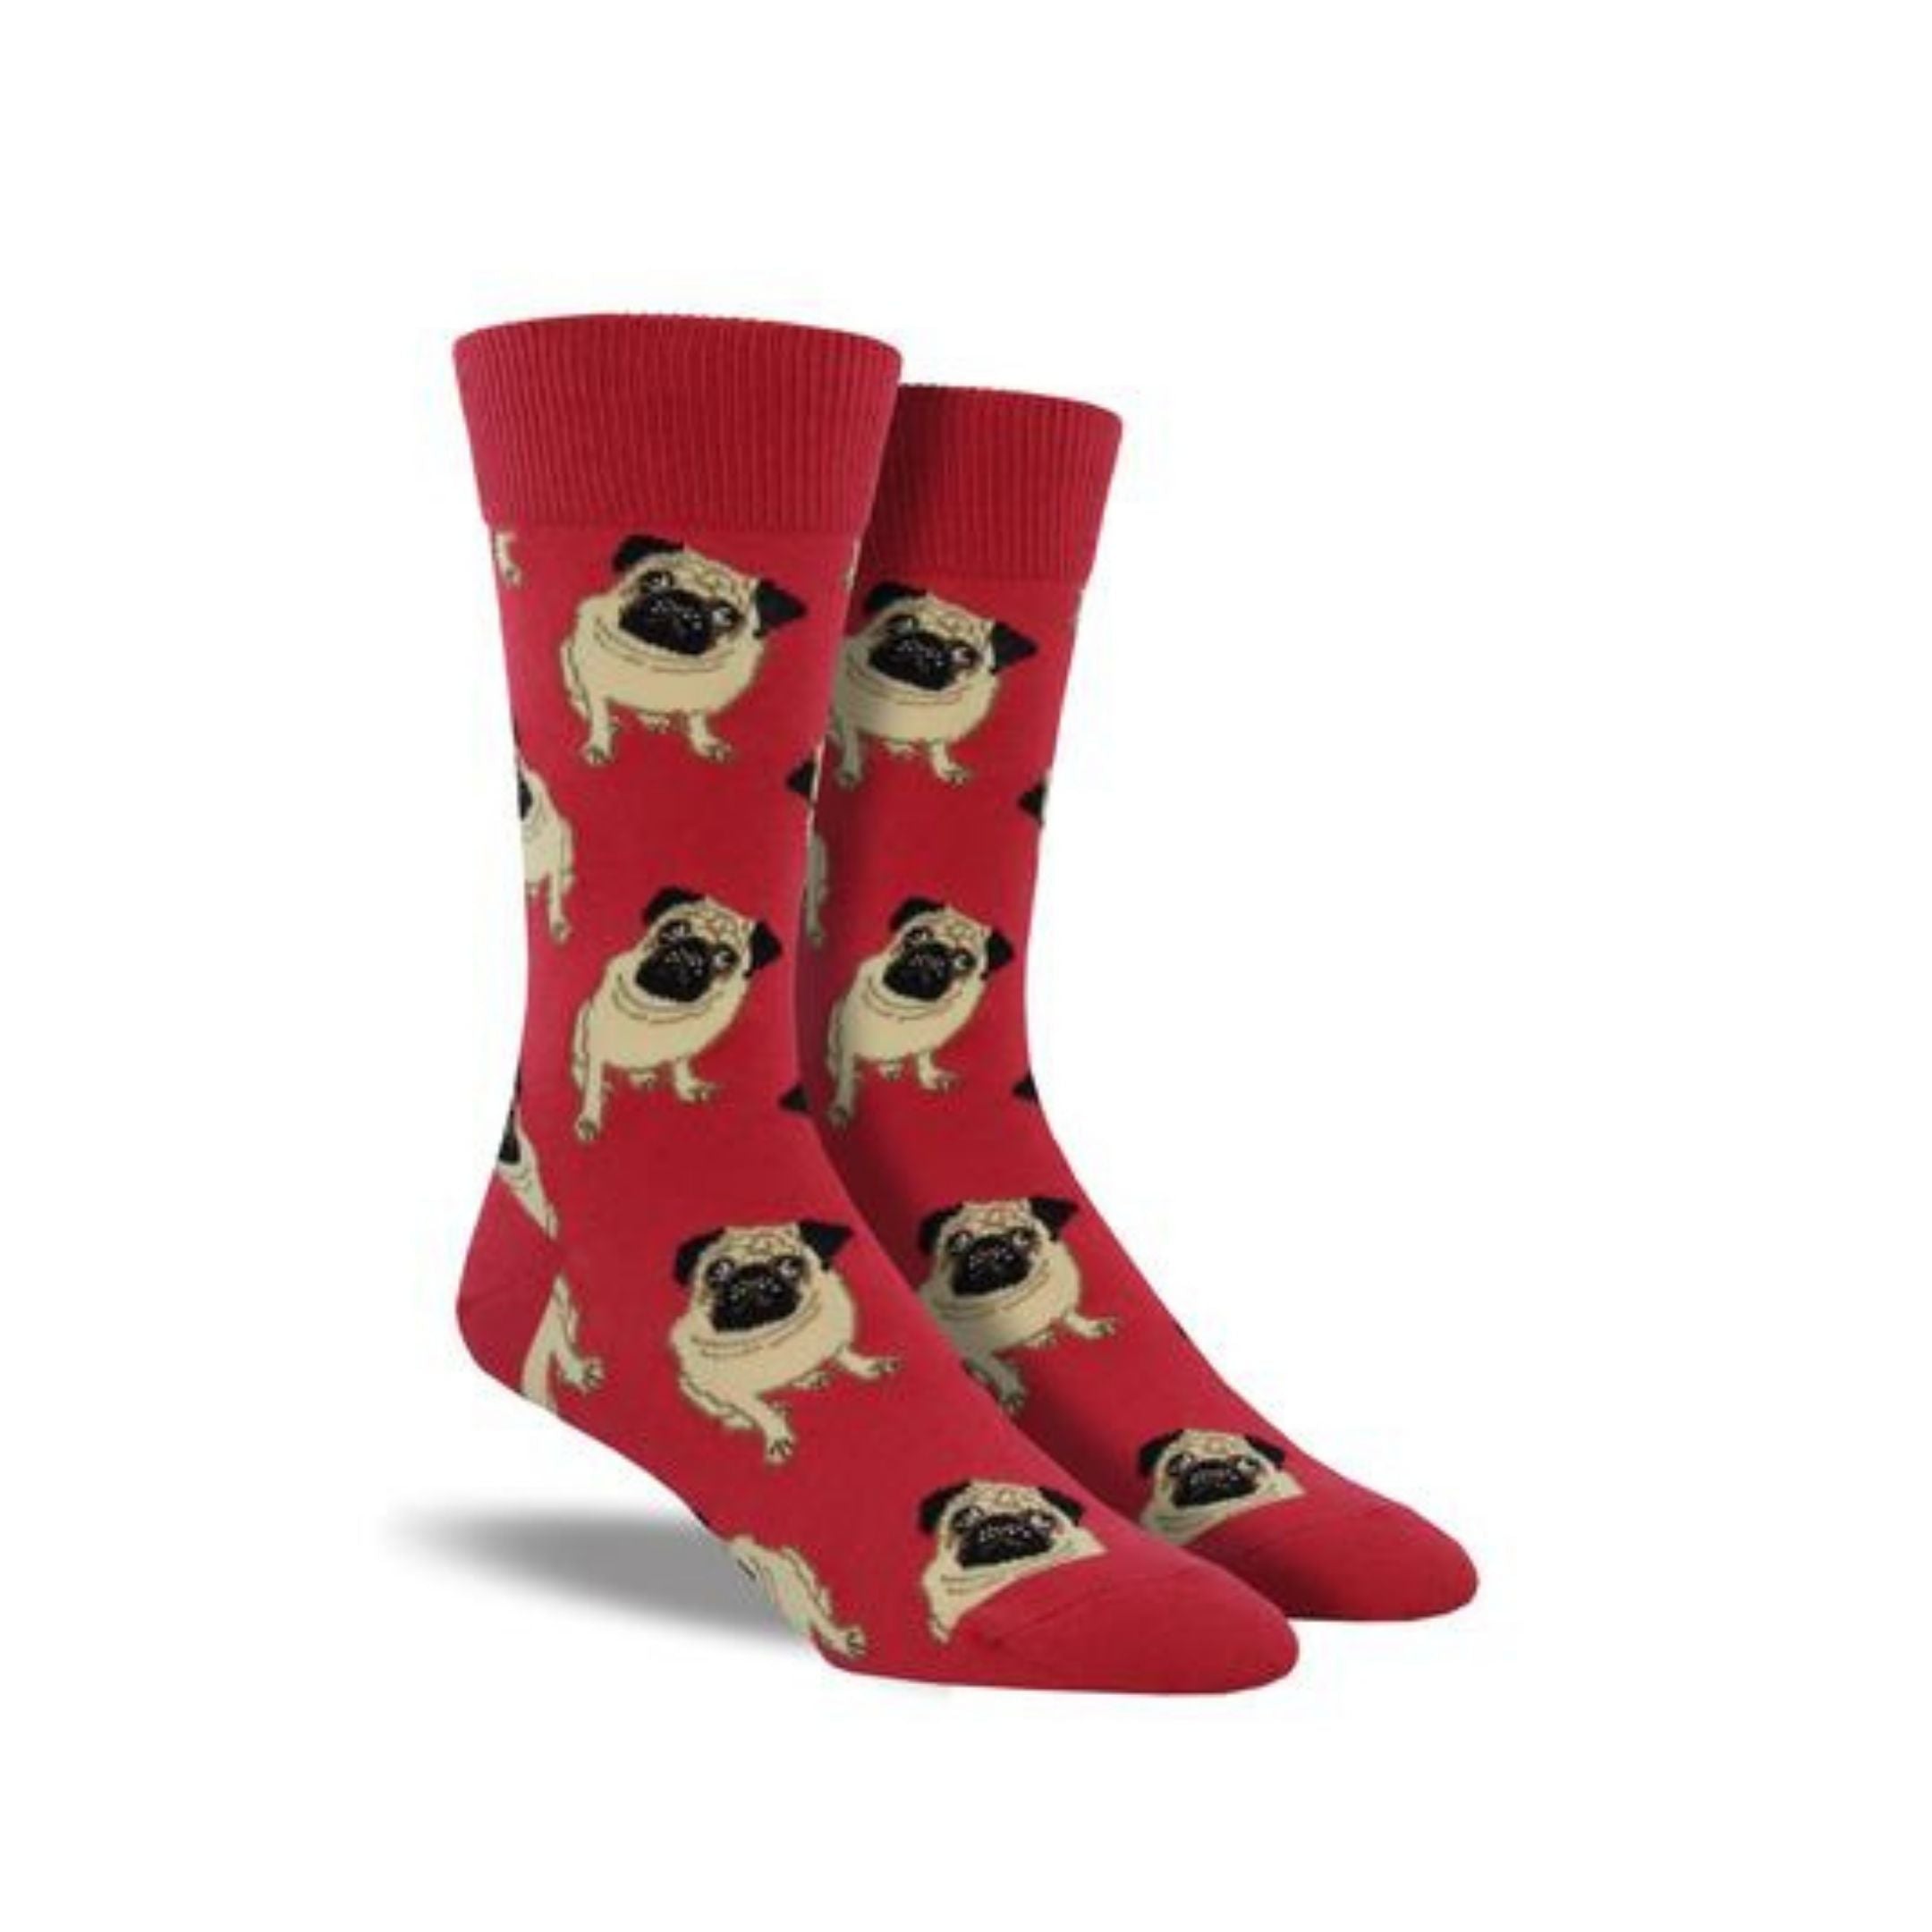 Red socks with pugs on them